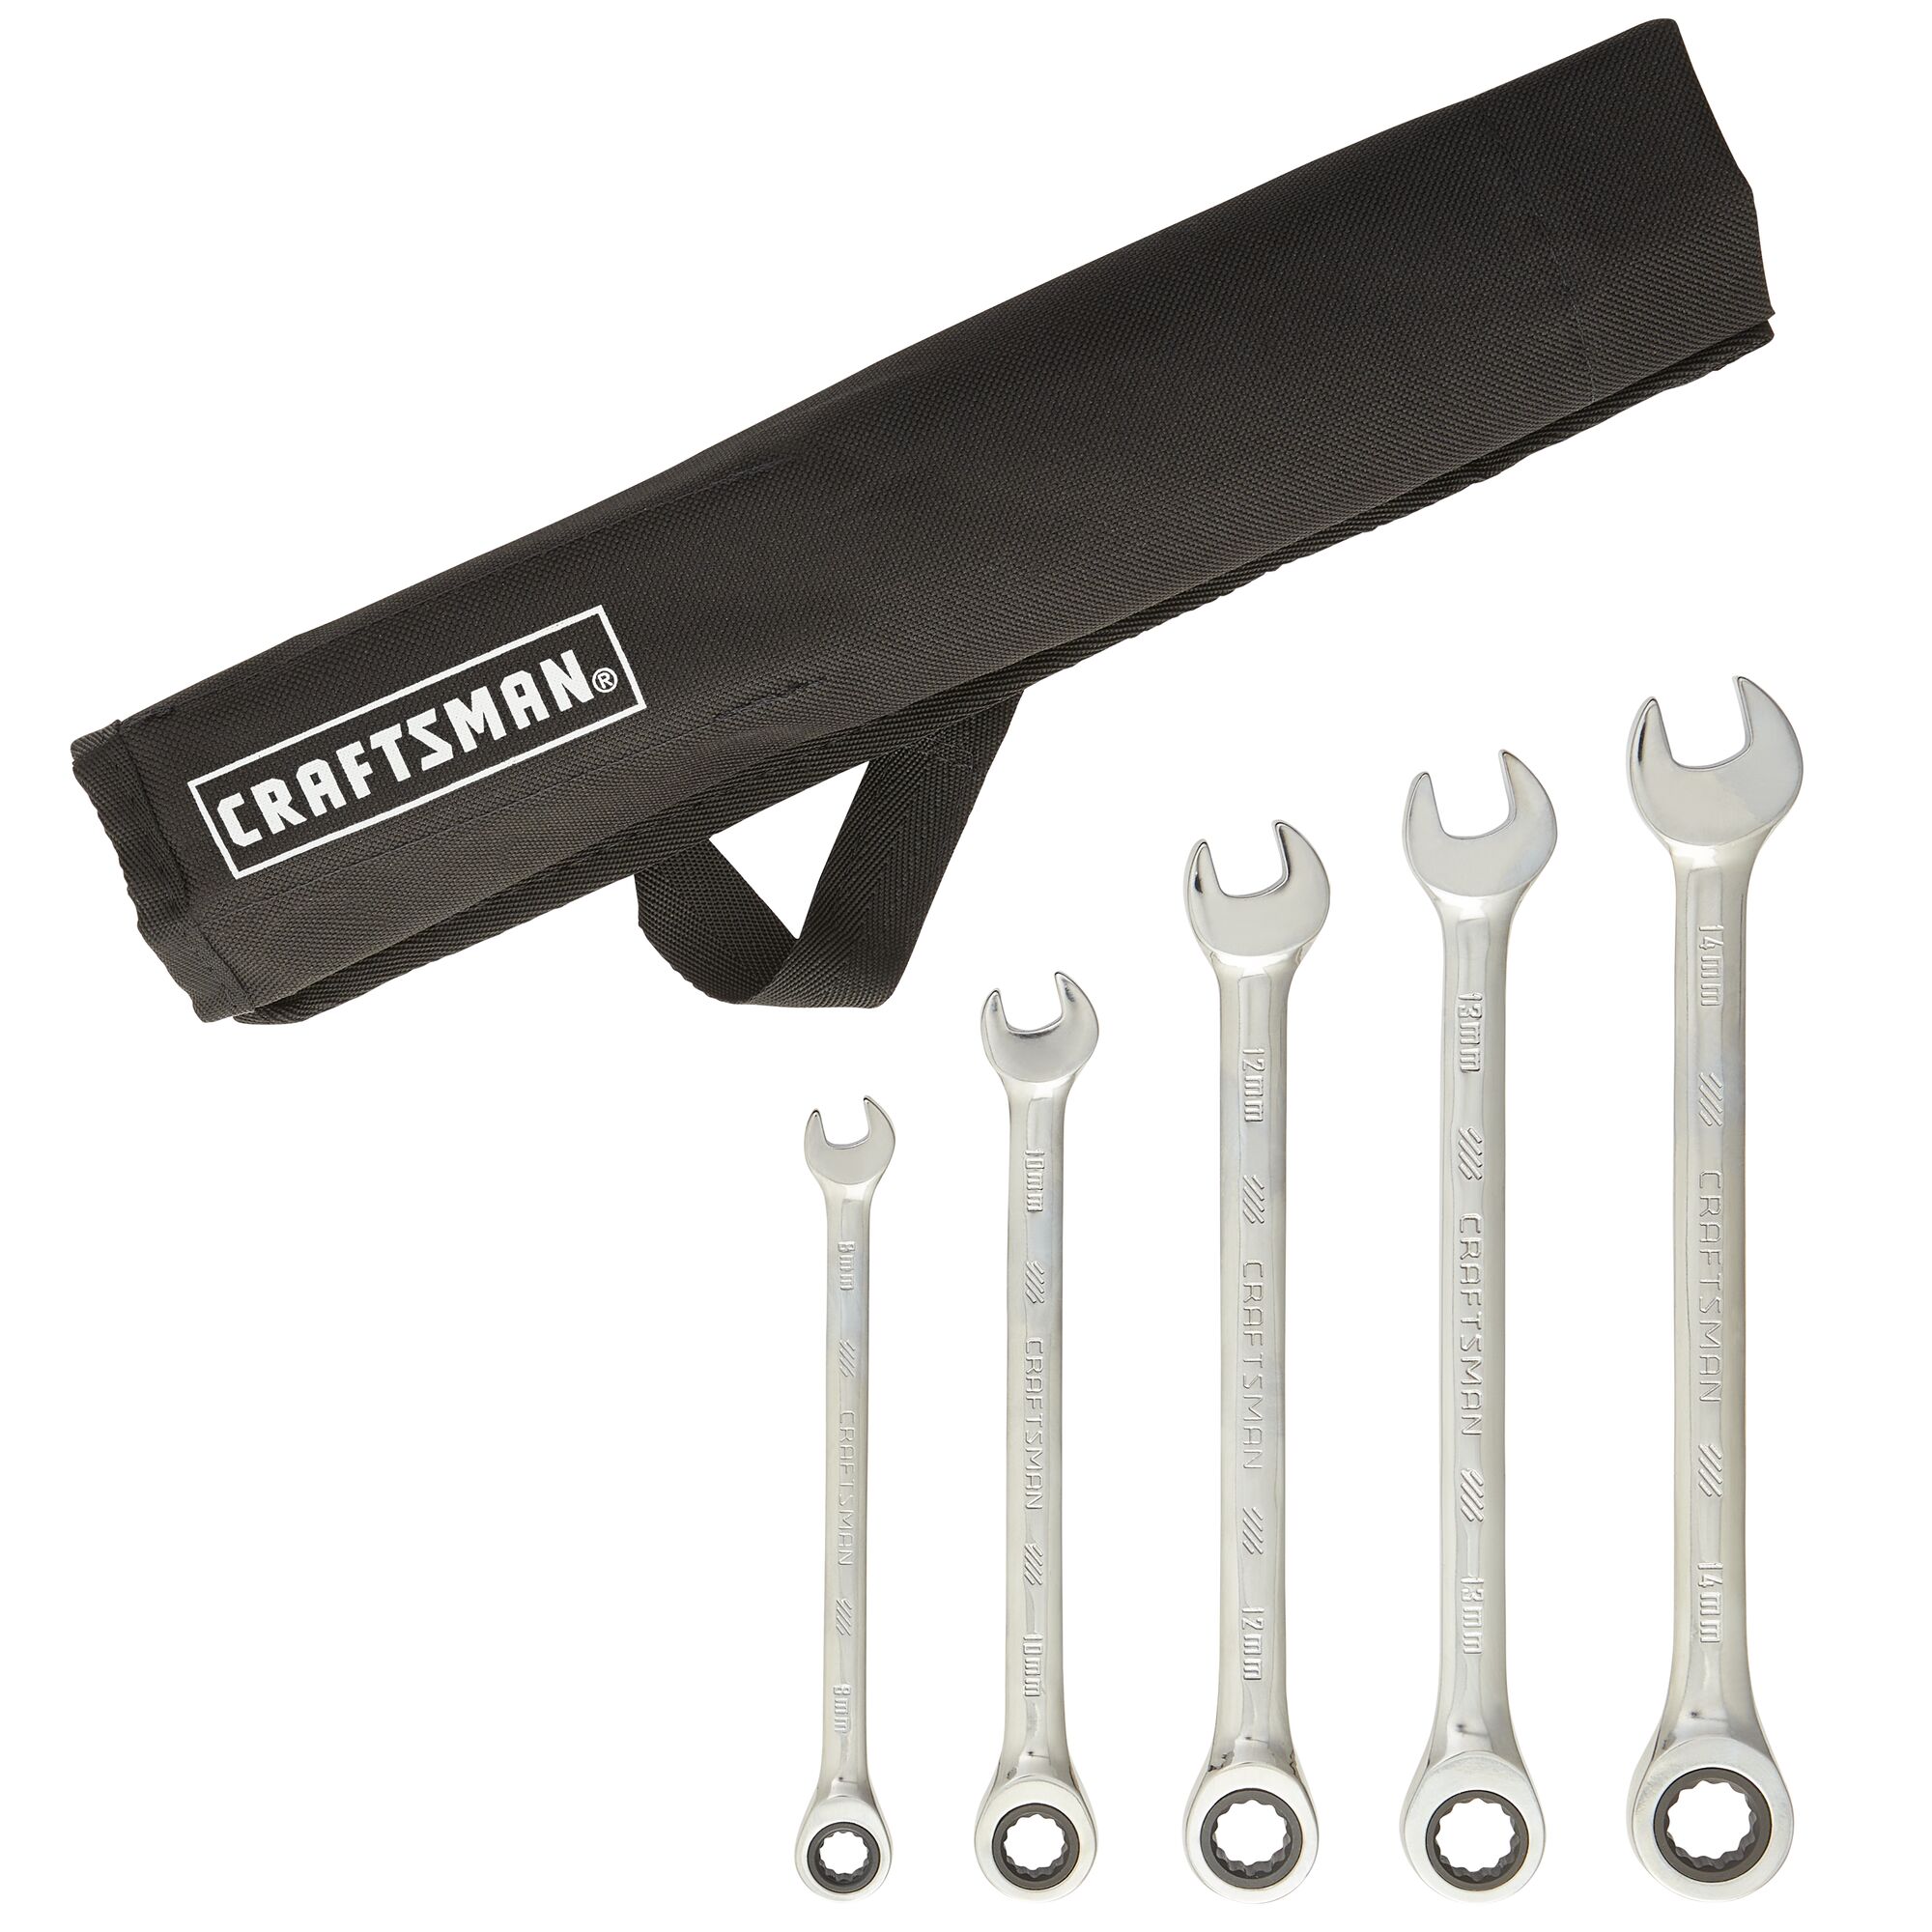 View of Craftsman 12 pt. Metric Ratchet Wrench Set 6 pc.